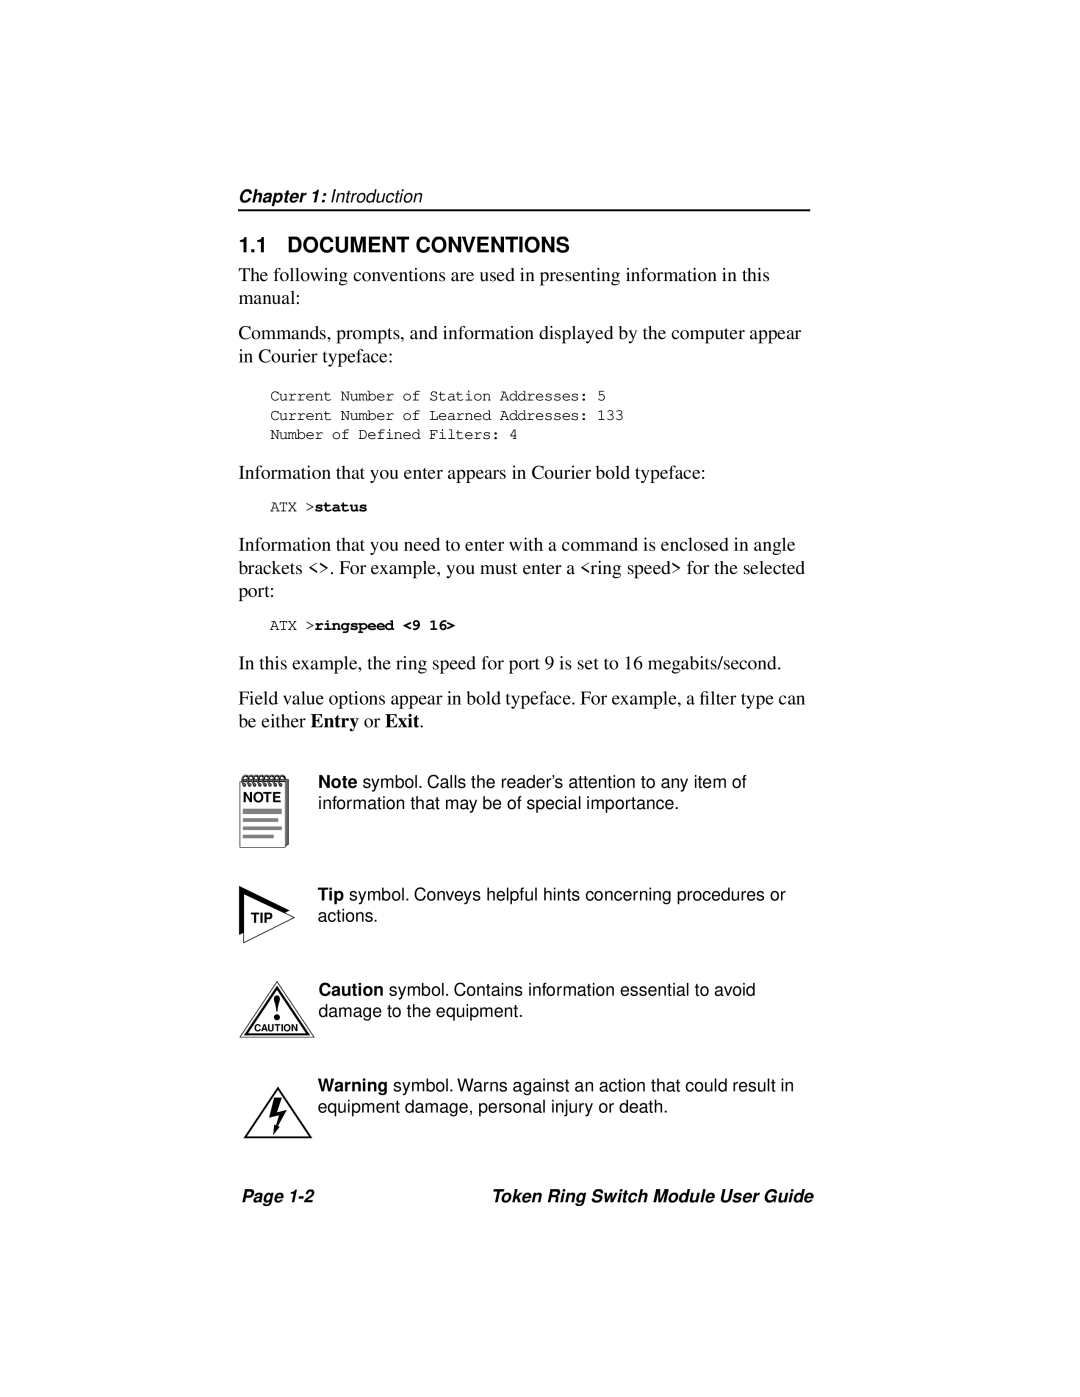 Cabletron Systems 3T02-04 manual Document Conventions 